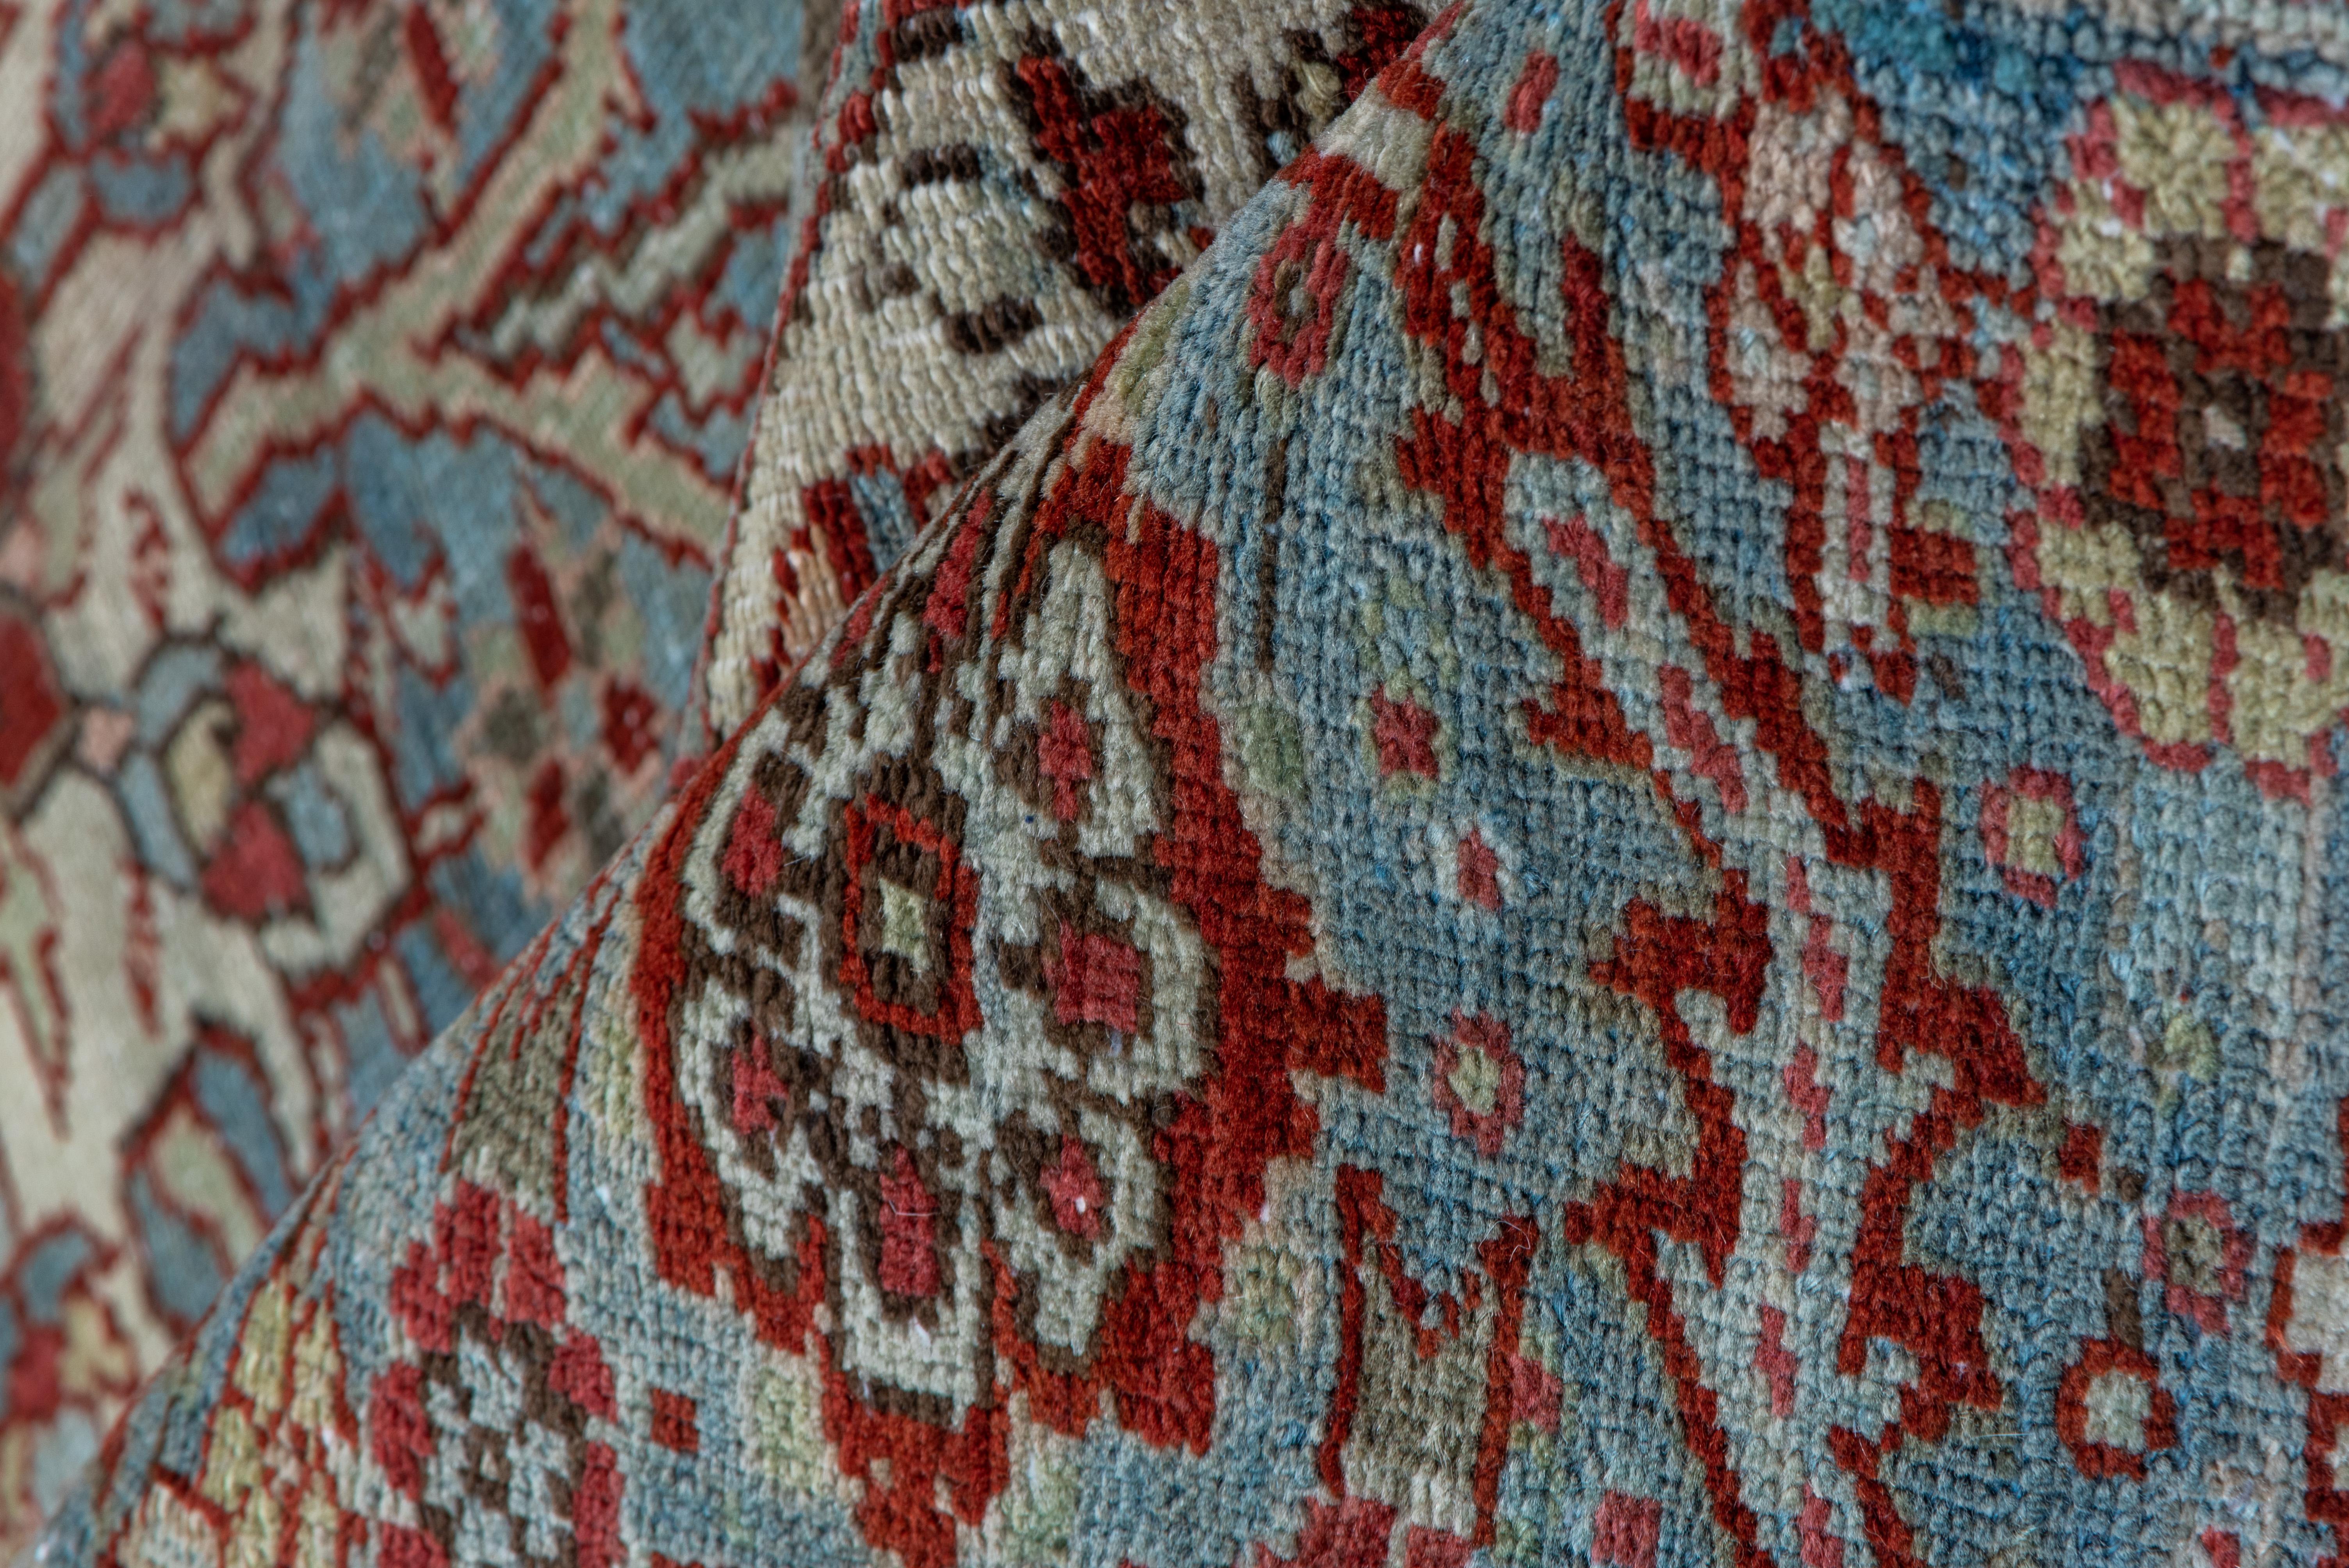 This good condition Northwest Persian village carpet has a semi-geometric design beginning with the teal internally lobed octogramme medallion enclosing projecting palmettes. The tomato red madder ground shows plenty curved leaves and bits of